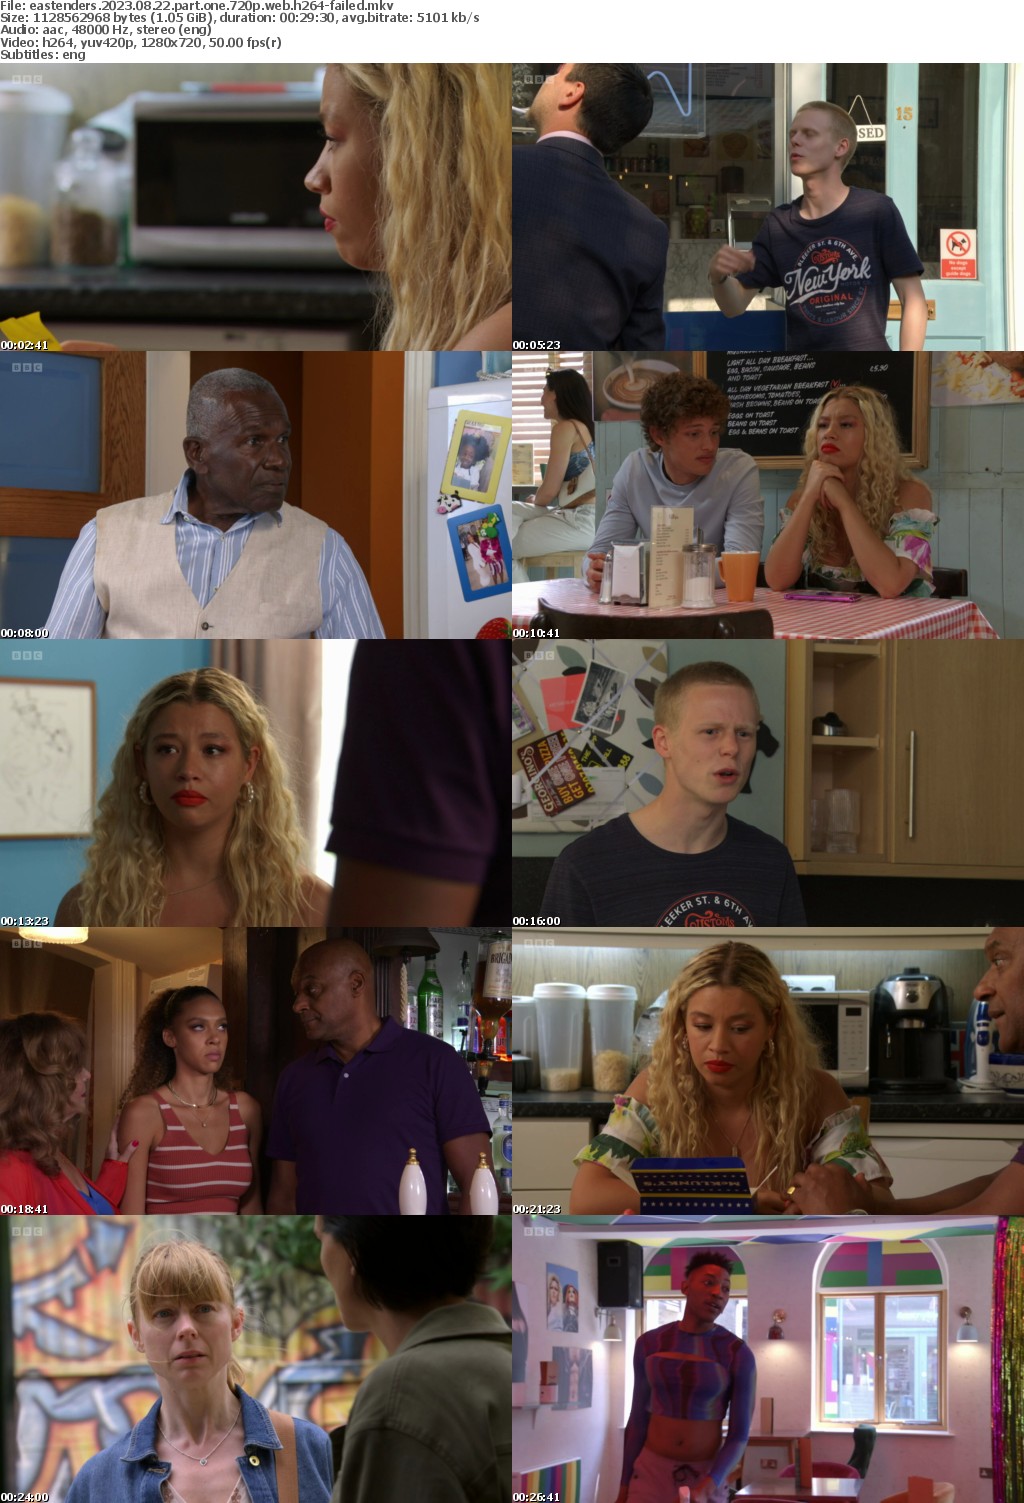 Eastenders 2023 08 22 Part One 720p WEB h264-FaiLED